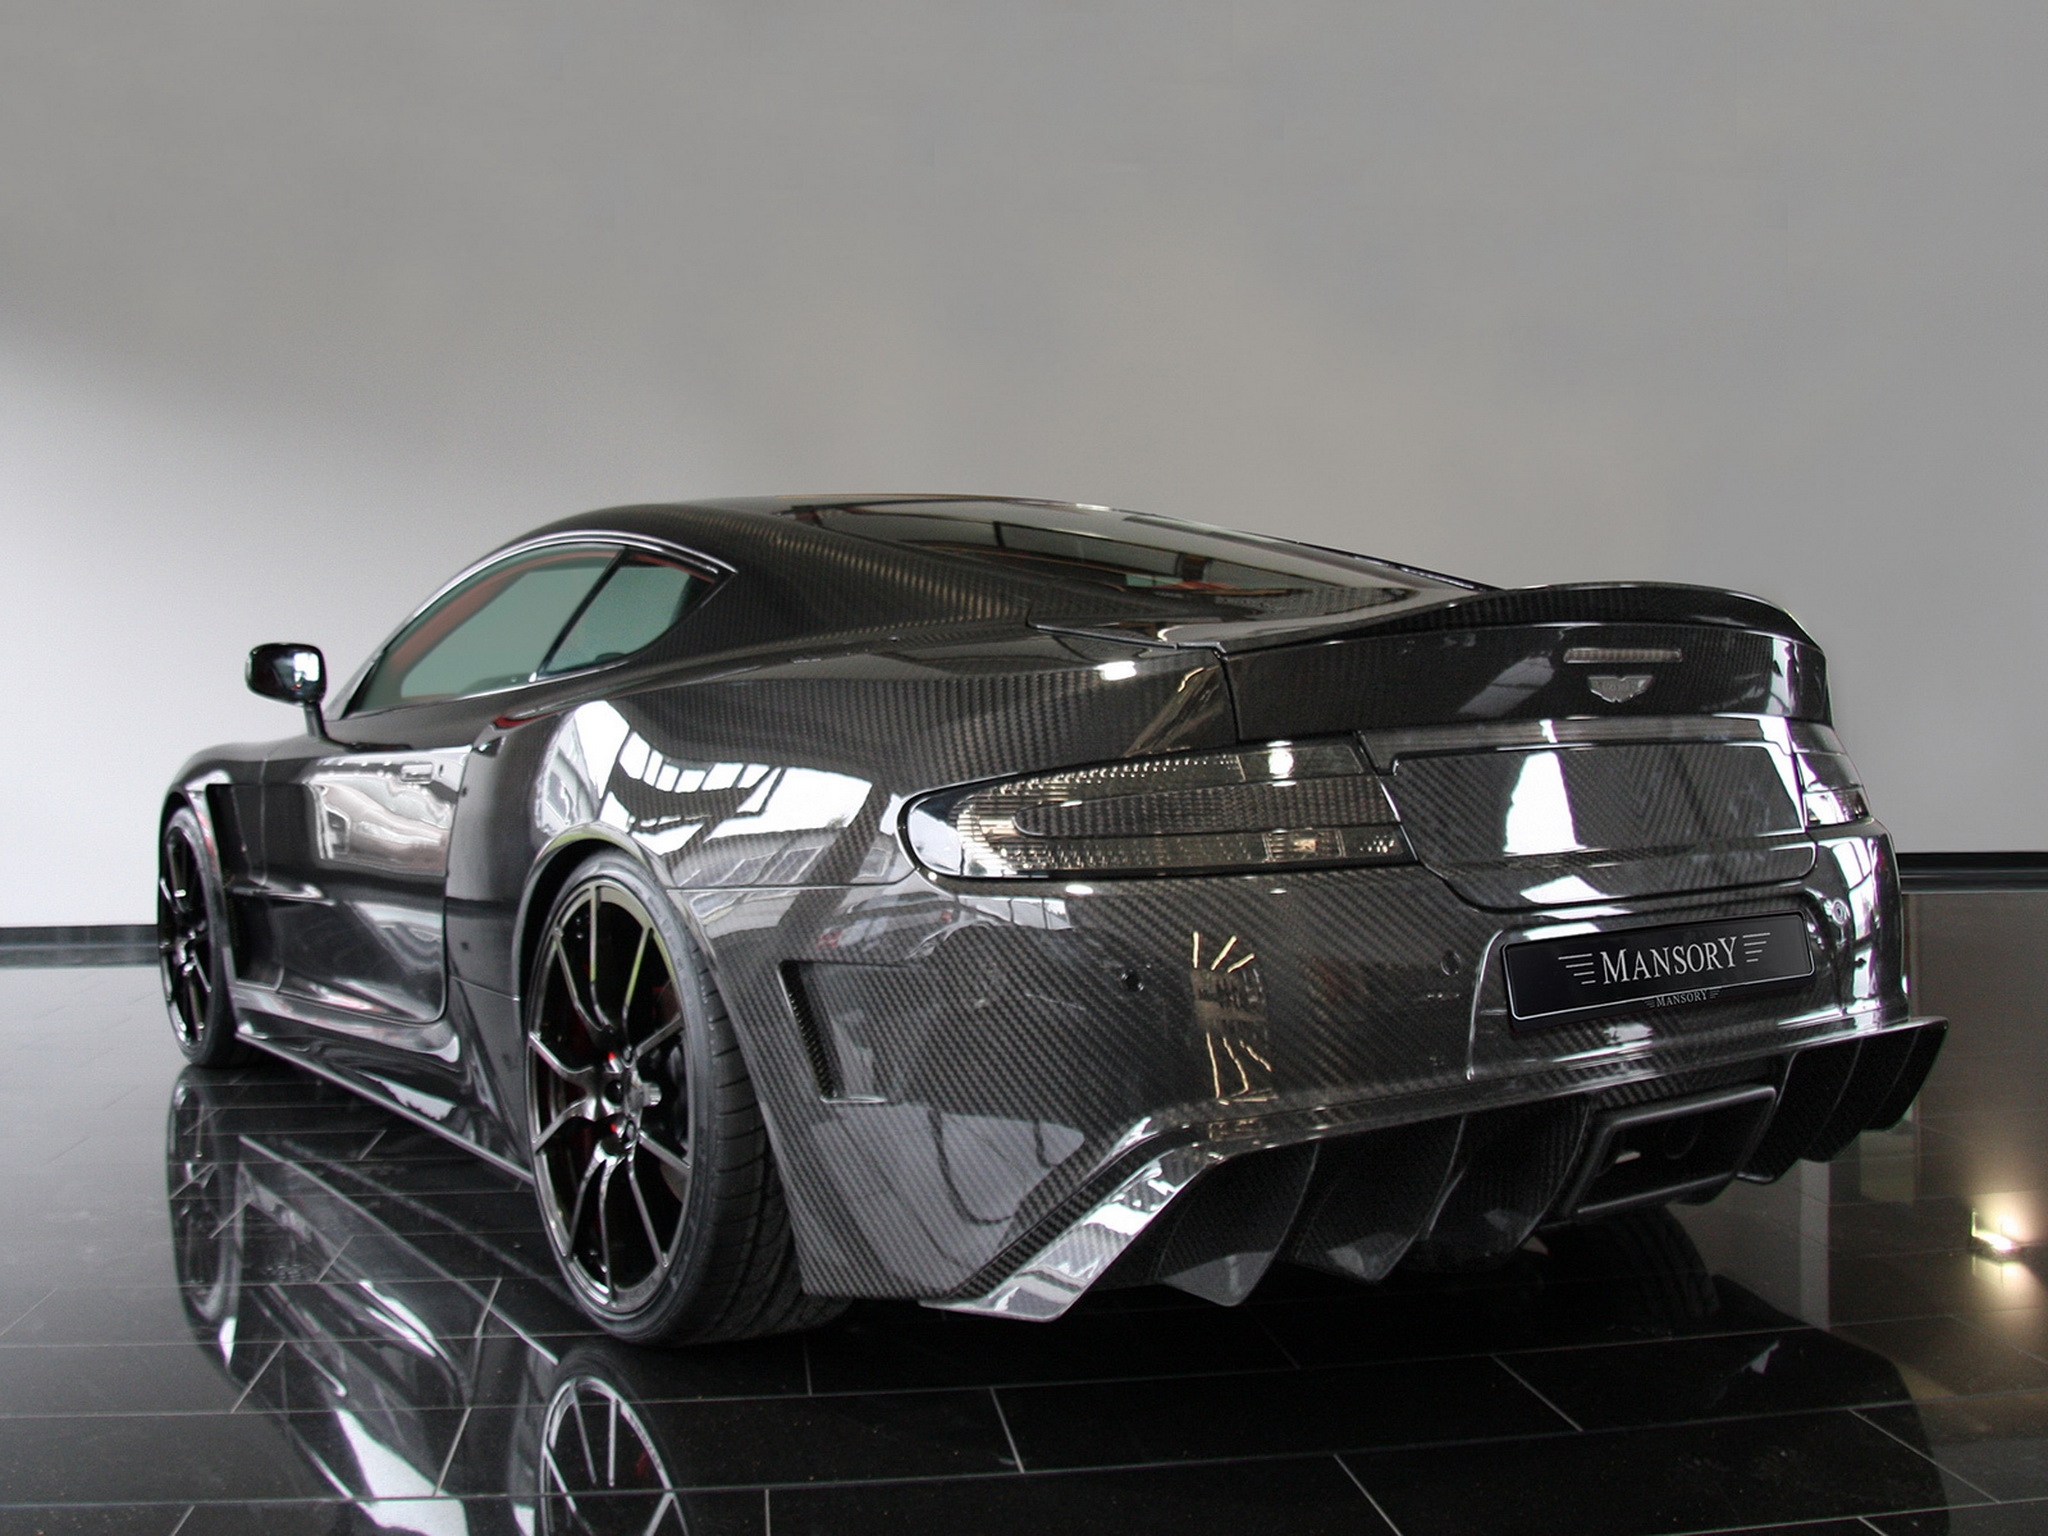 129885 download wallpaper aston martin, carbon, cars, black, reflection, back view, rear view, style, dbs, 2009, mansory screensavers and pictures for free